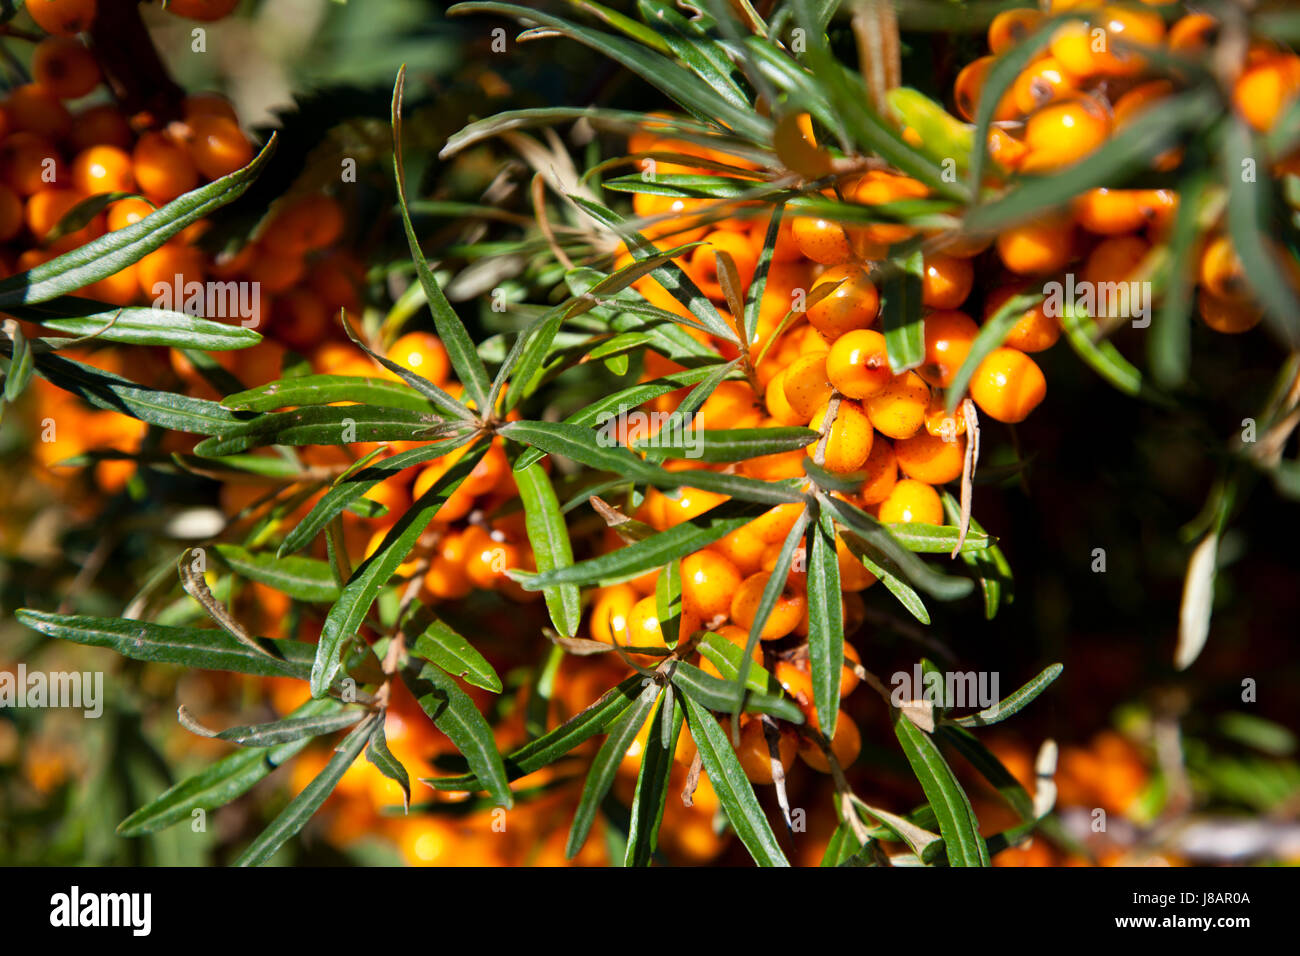 branches, berry, sallow thorn, buckthorns, summer, summerly, ripe, progenies, Stock Photo